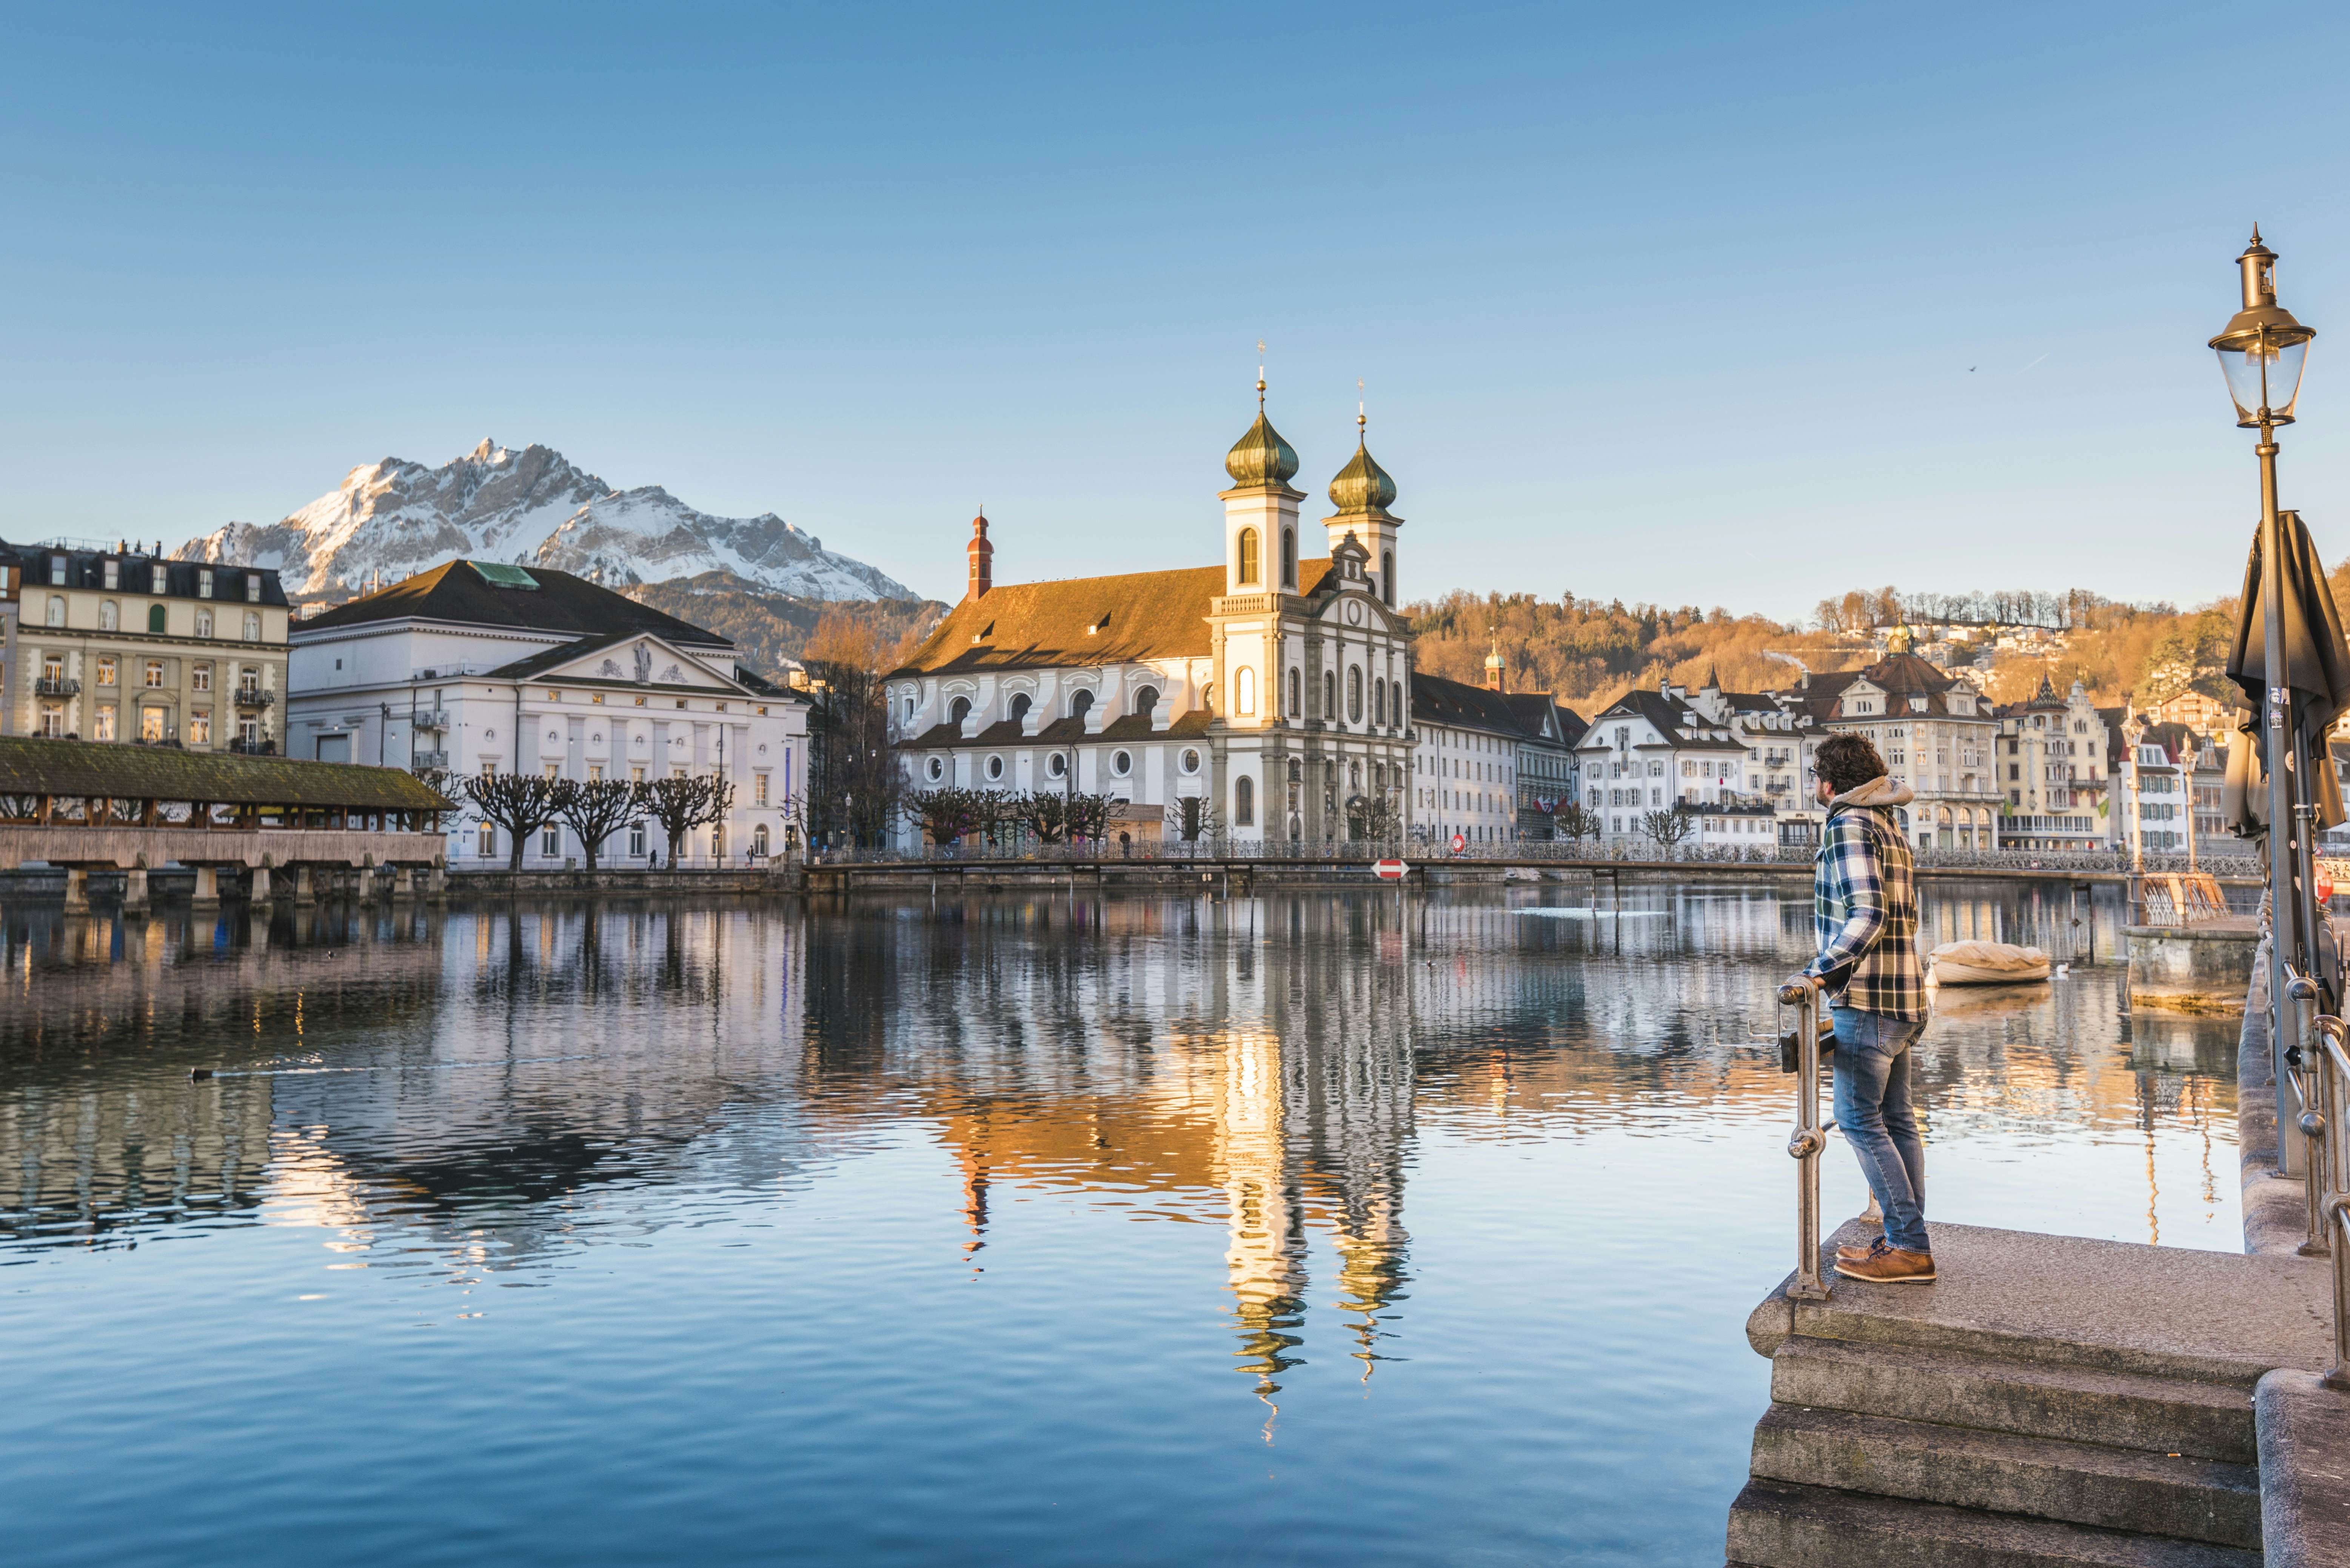 Connections - Why You Should Visit Zurich